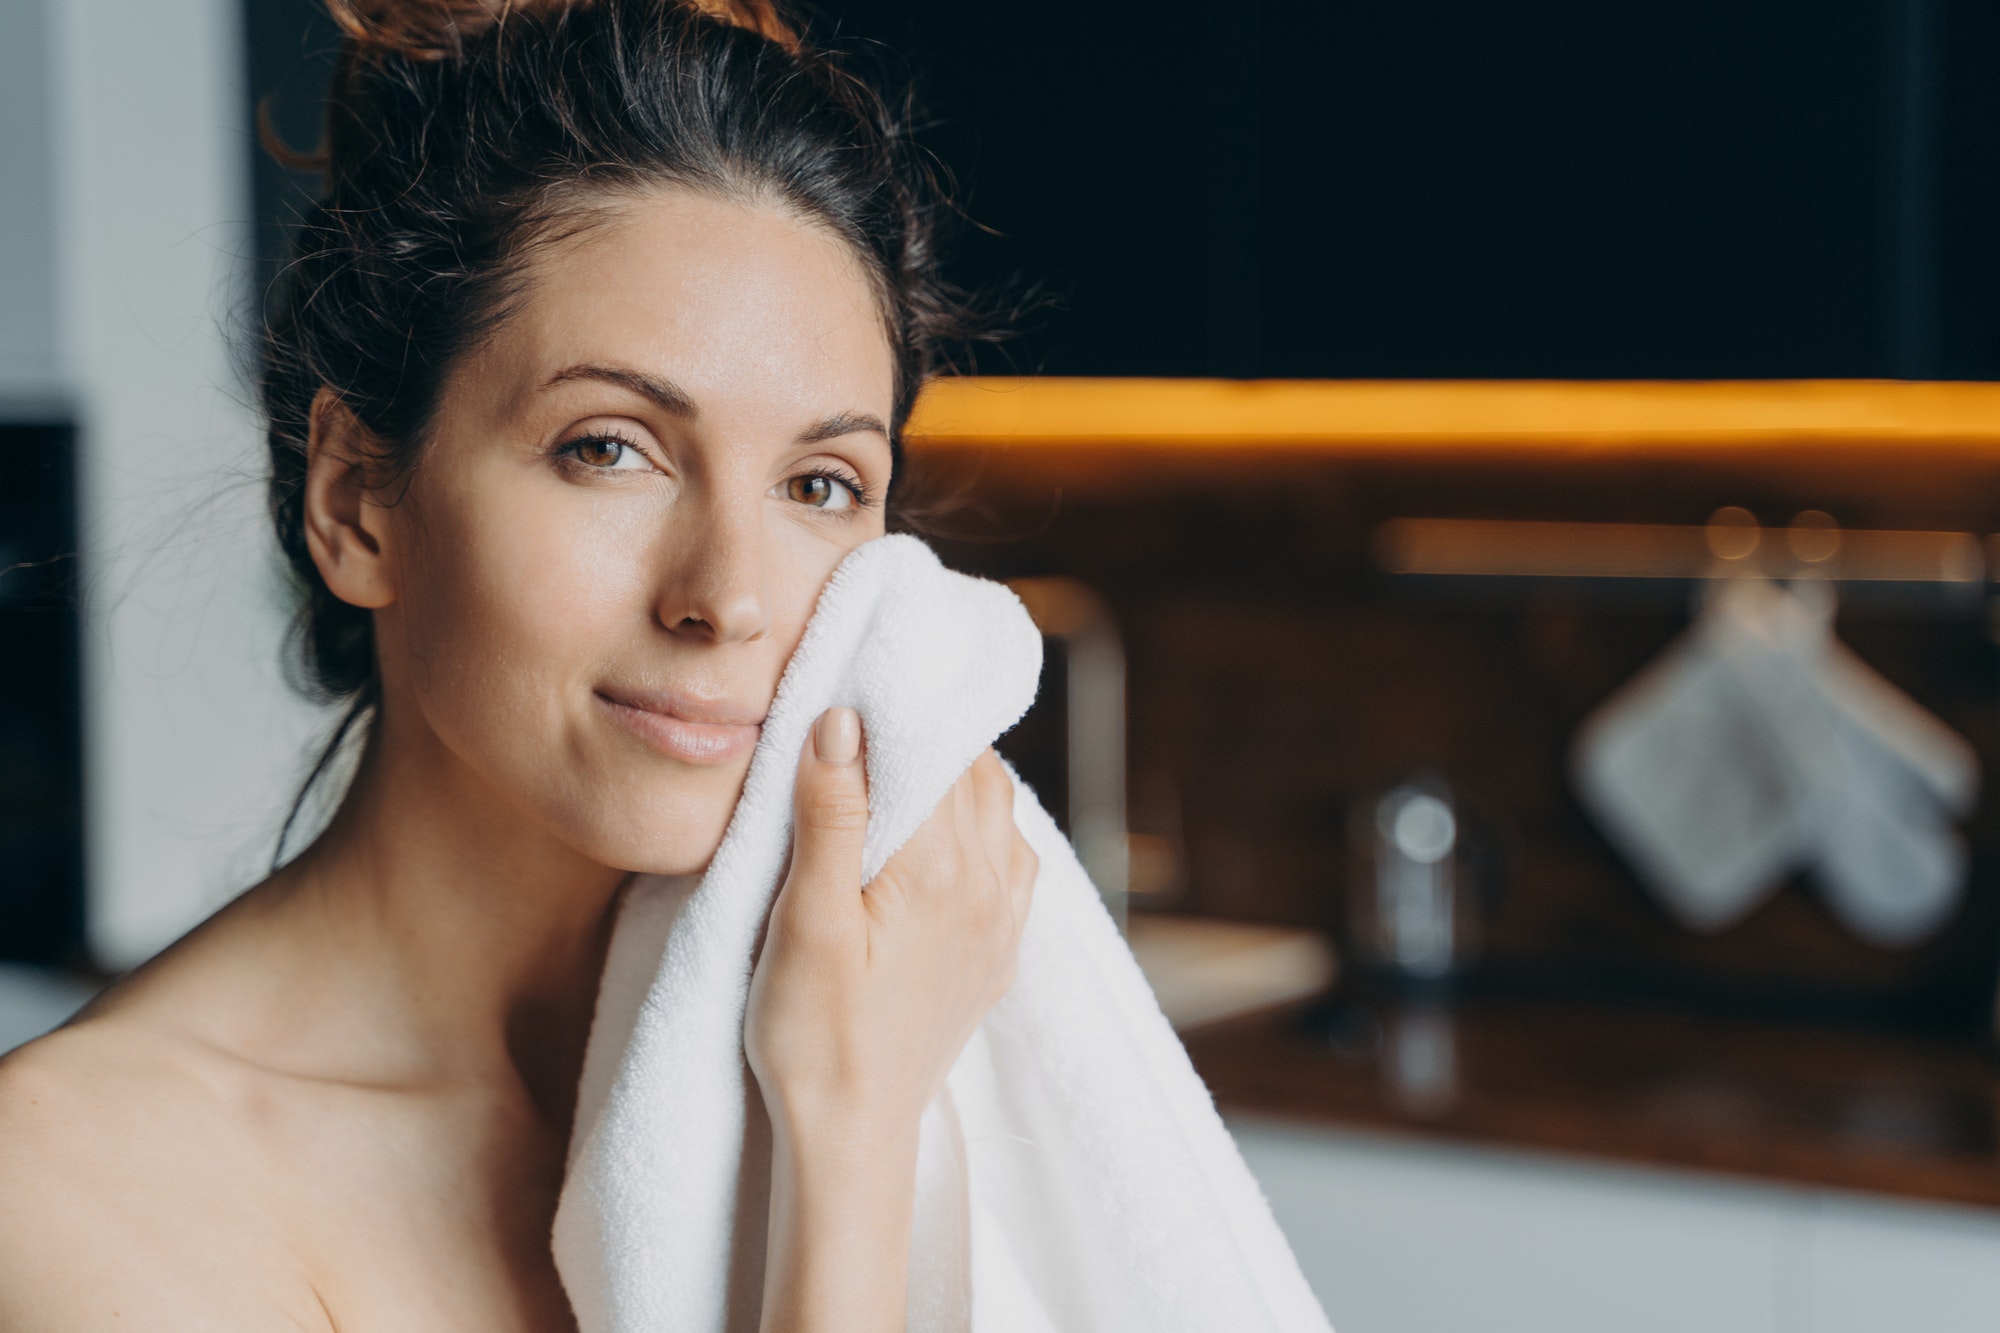 Pretty girl wipe face with towel after shower, enjoy healthy smooth skin at home. Hygiene, skincare